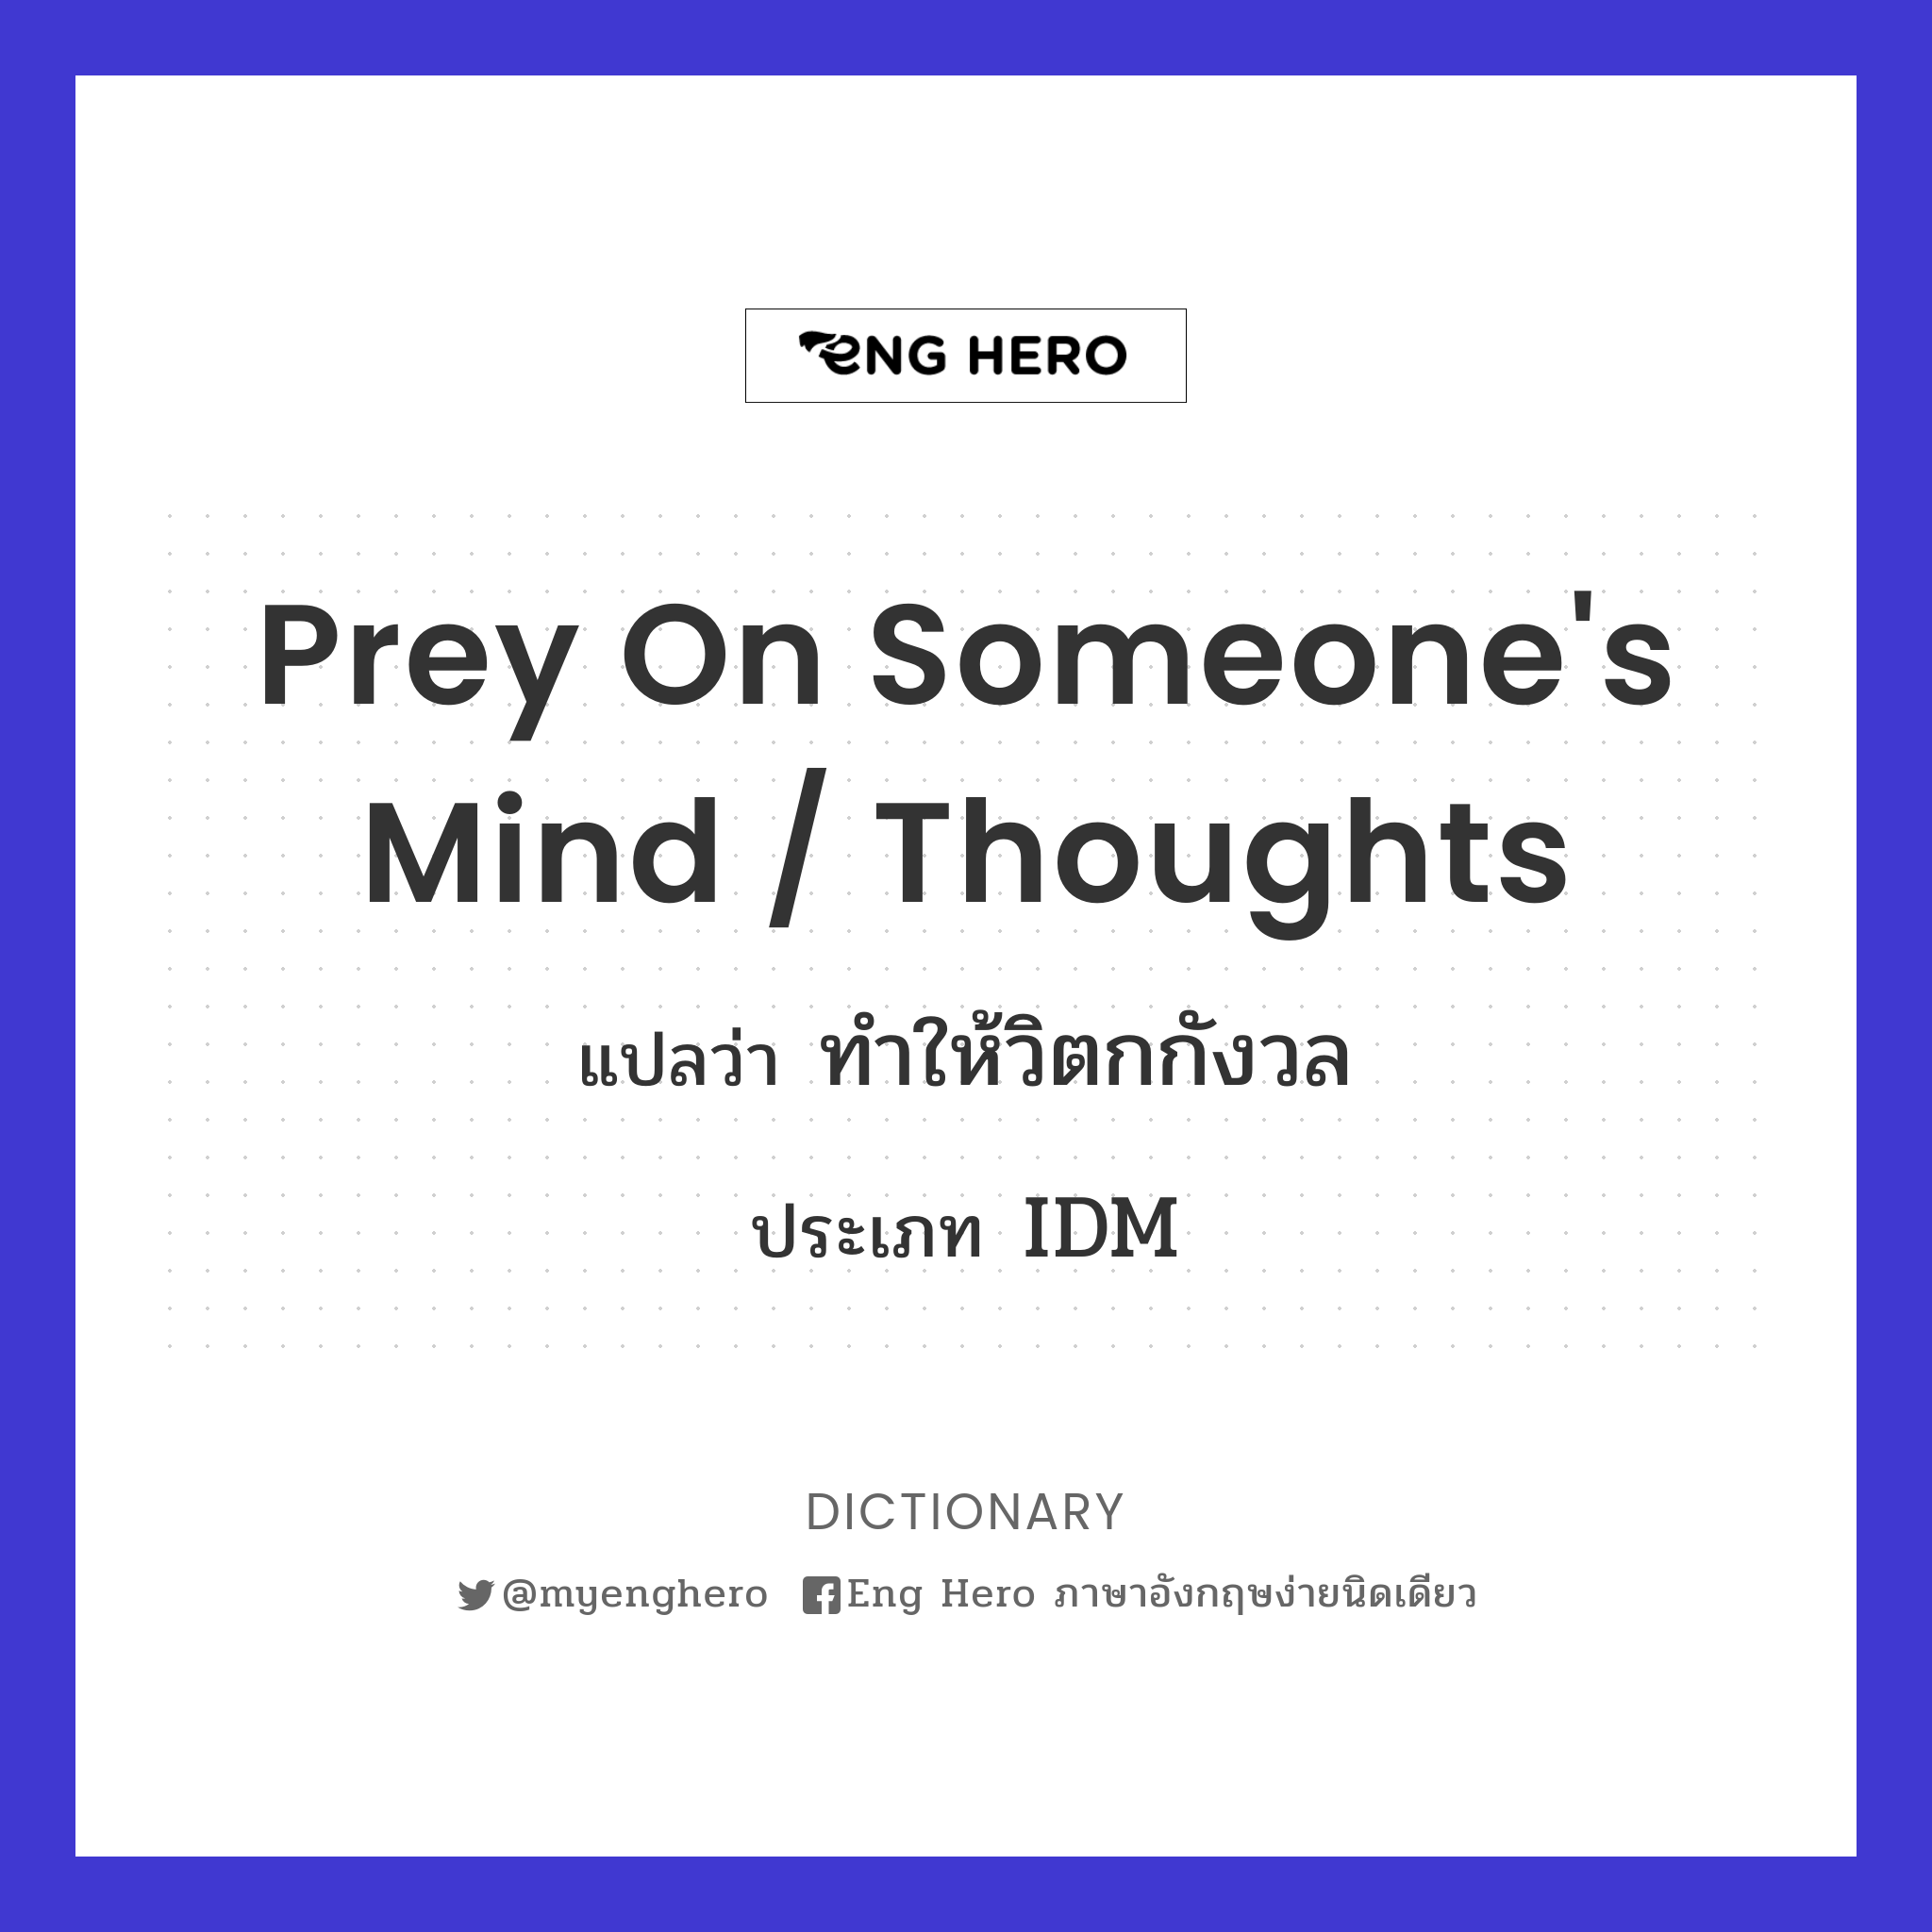 prey on someone's mind / thoughts